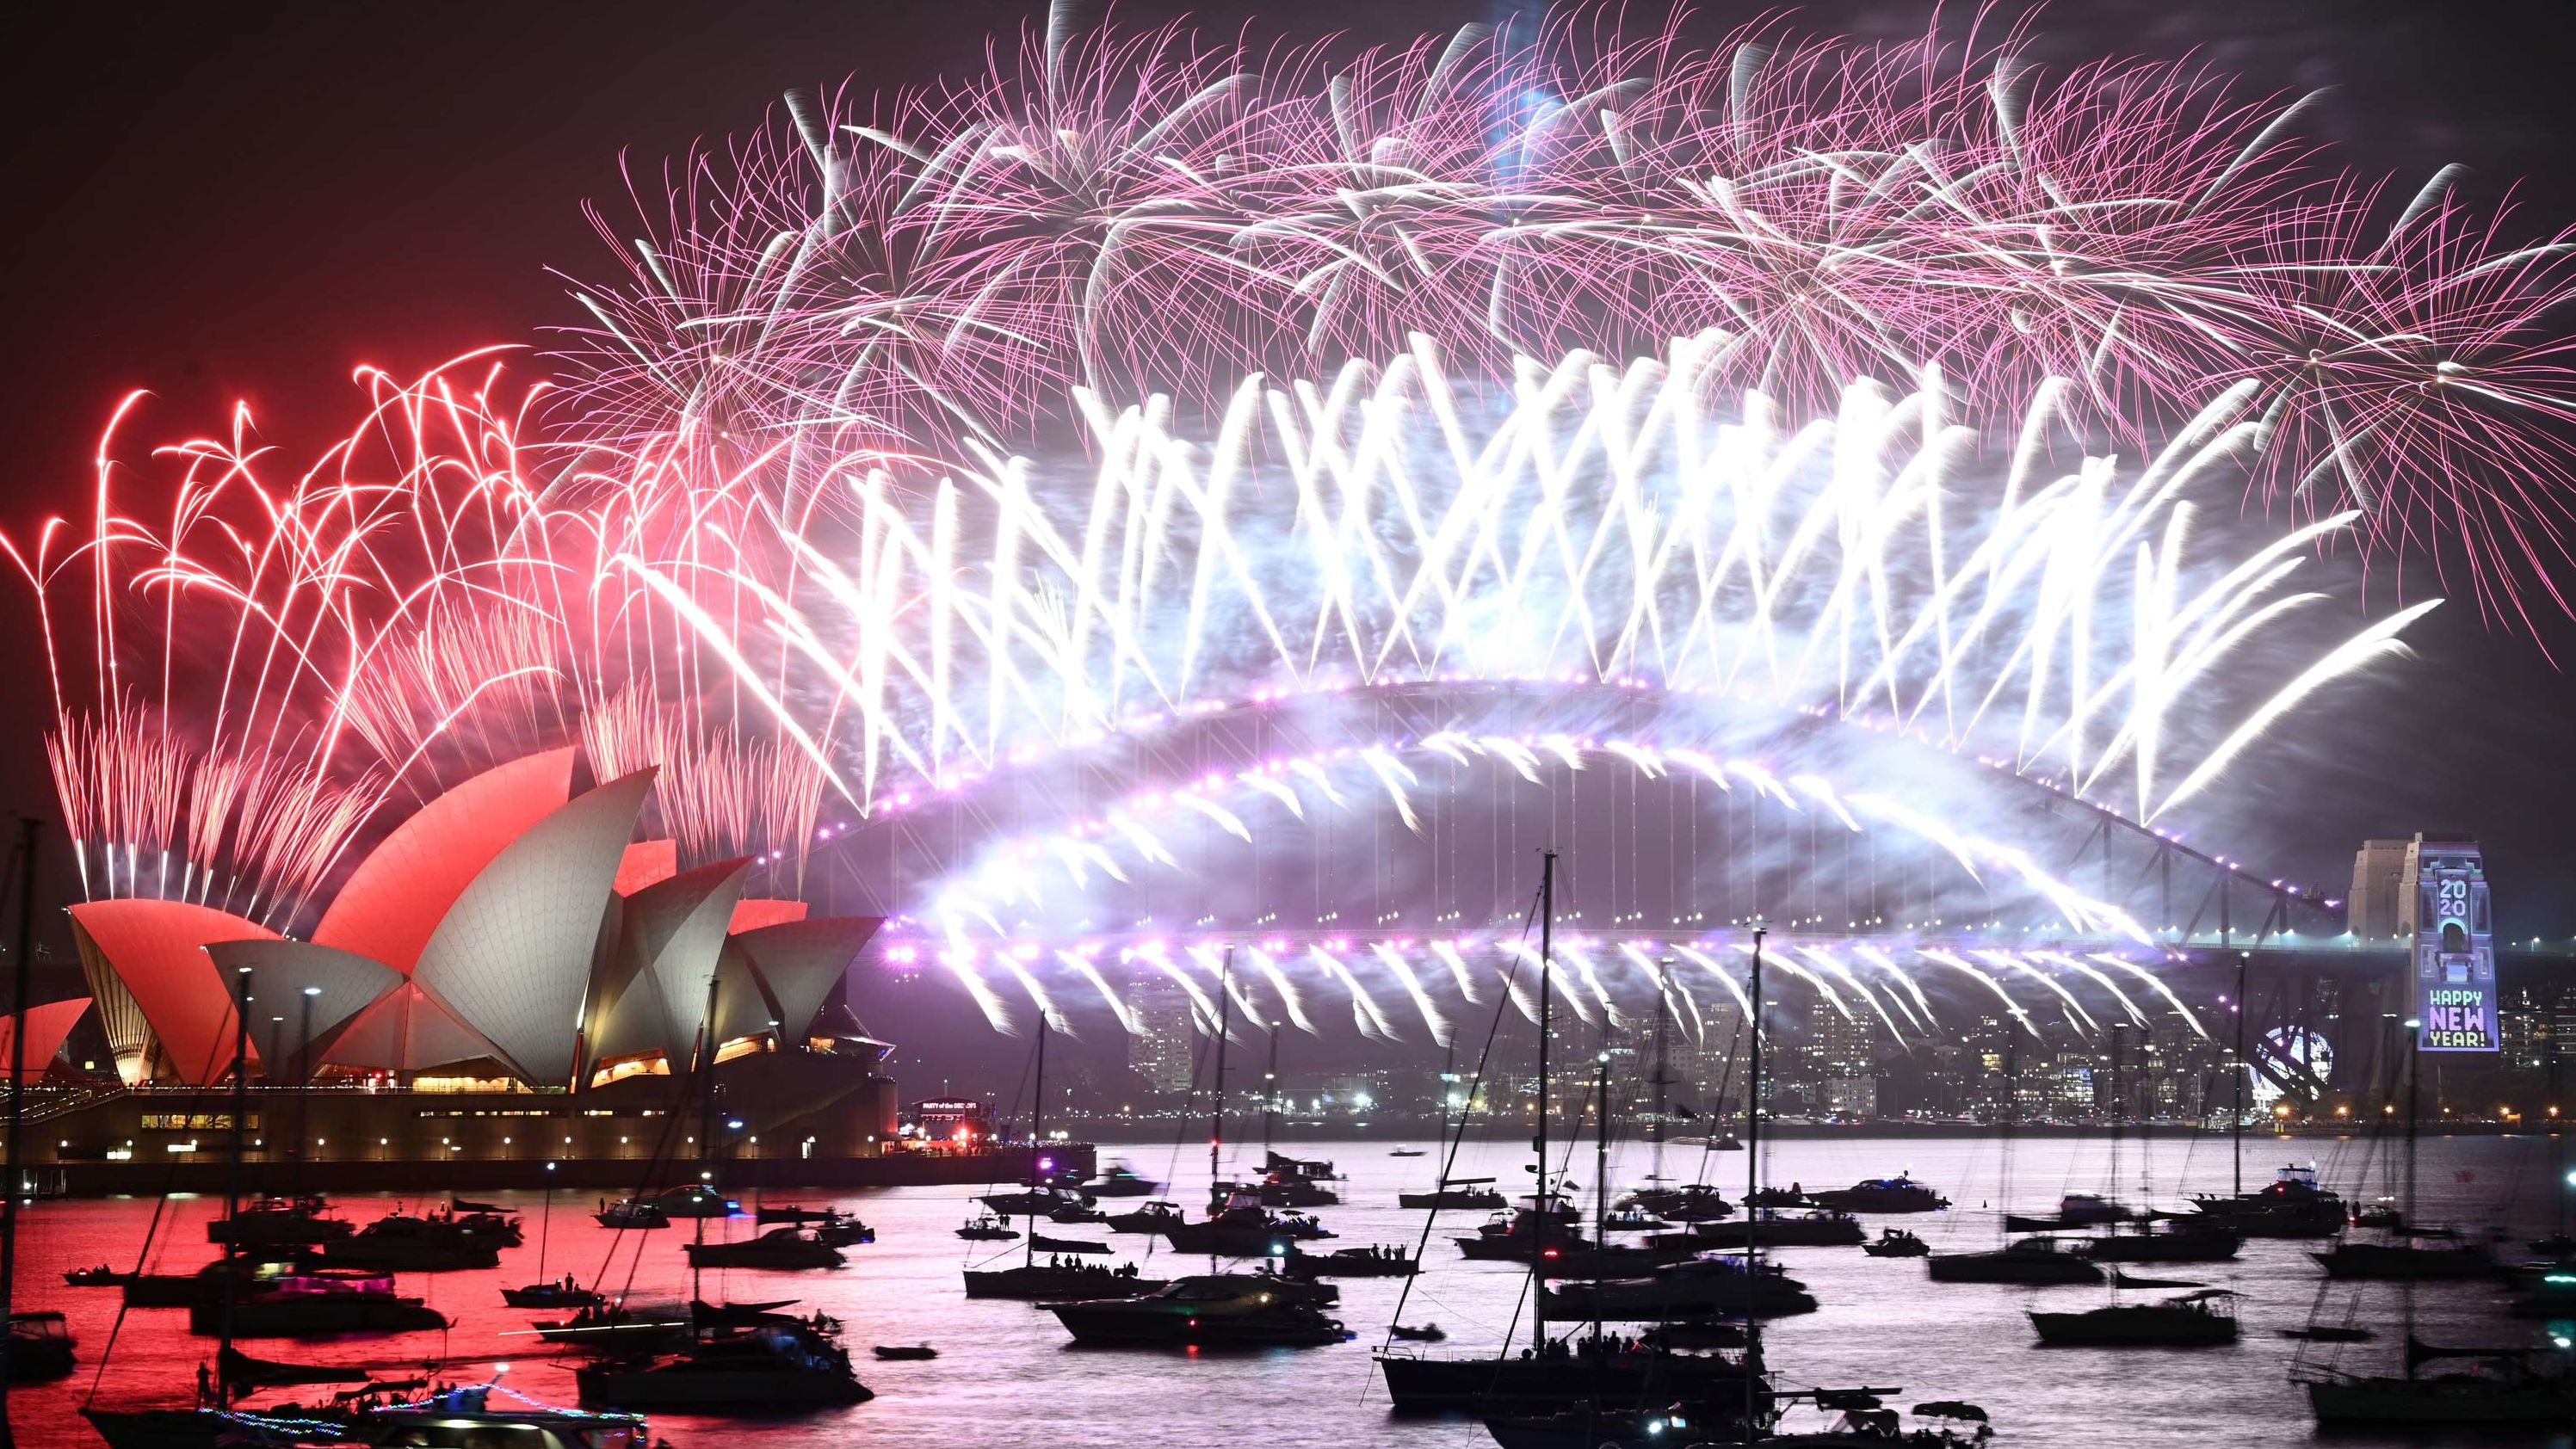 New Year's Eve fireworks erupt over Sydney's Harbour Bridge and Opera House during the fireworks show on January 1, 2020.